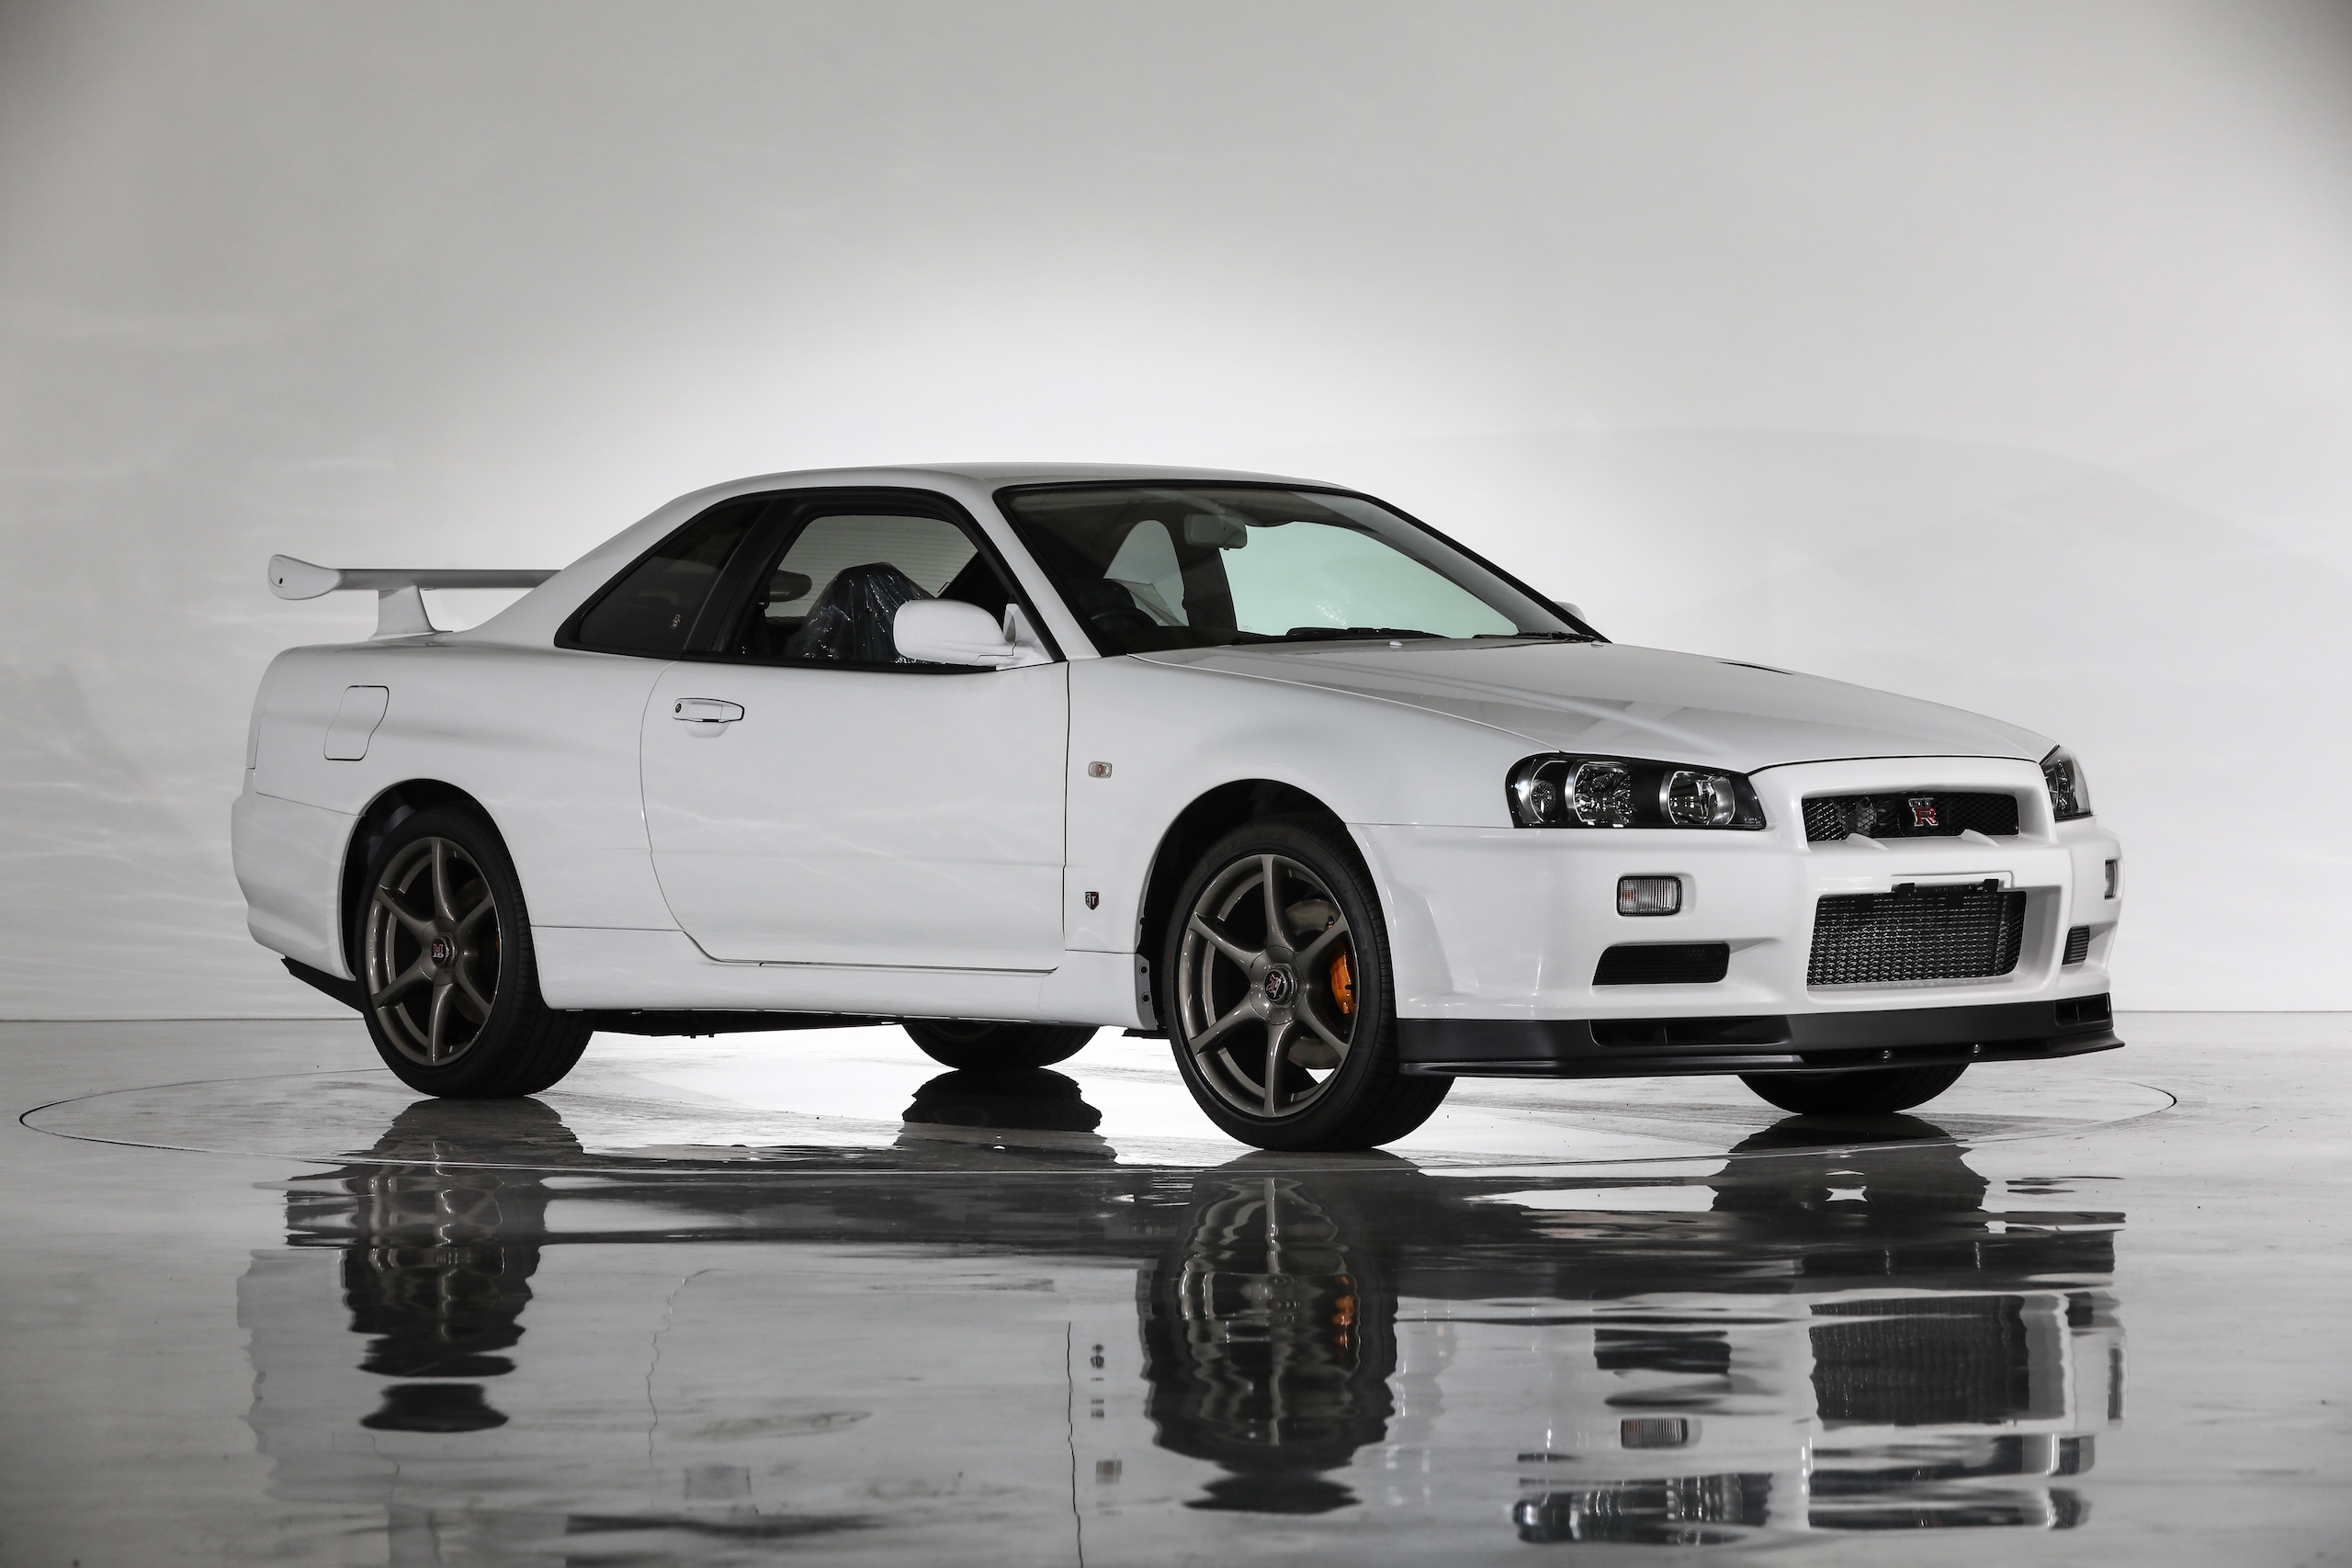 Six Mile Nissan Skyline Gt R R34 Sells For A Record 400 000 Hagerty Uk